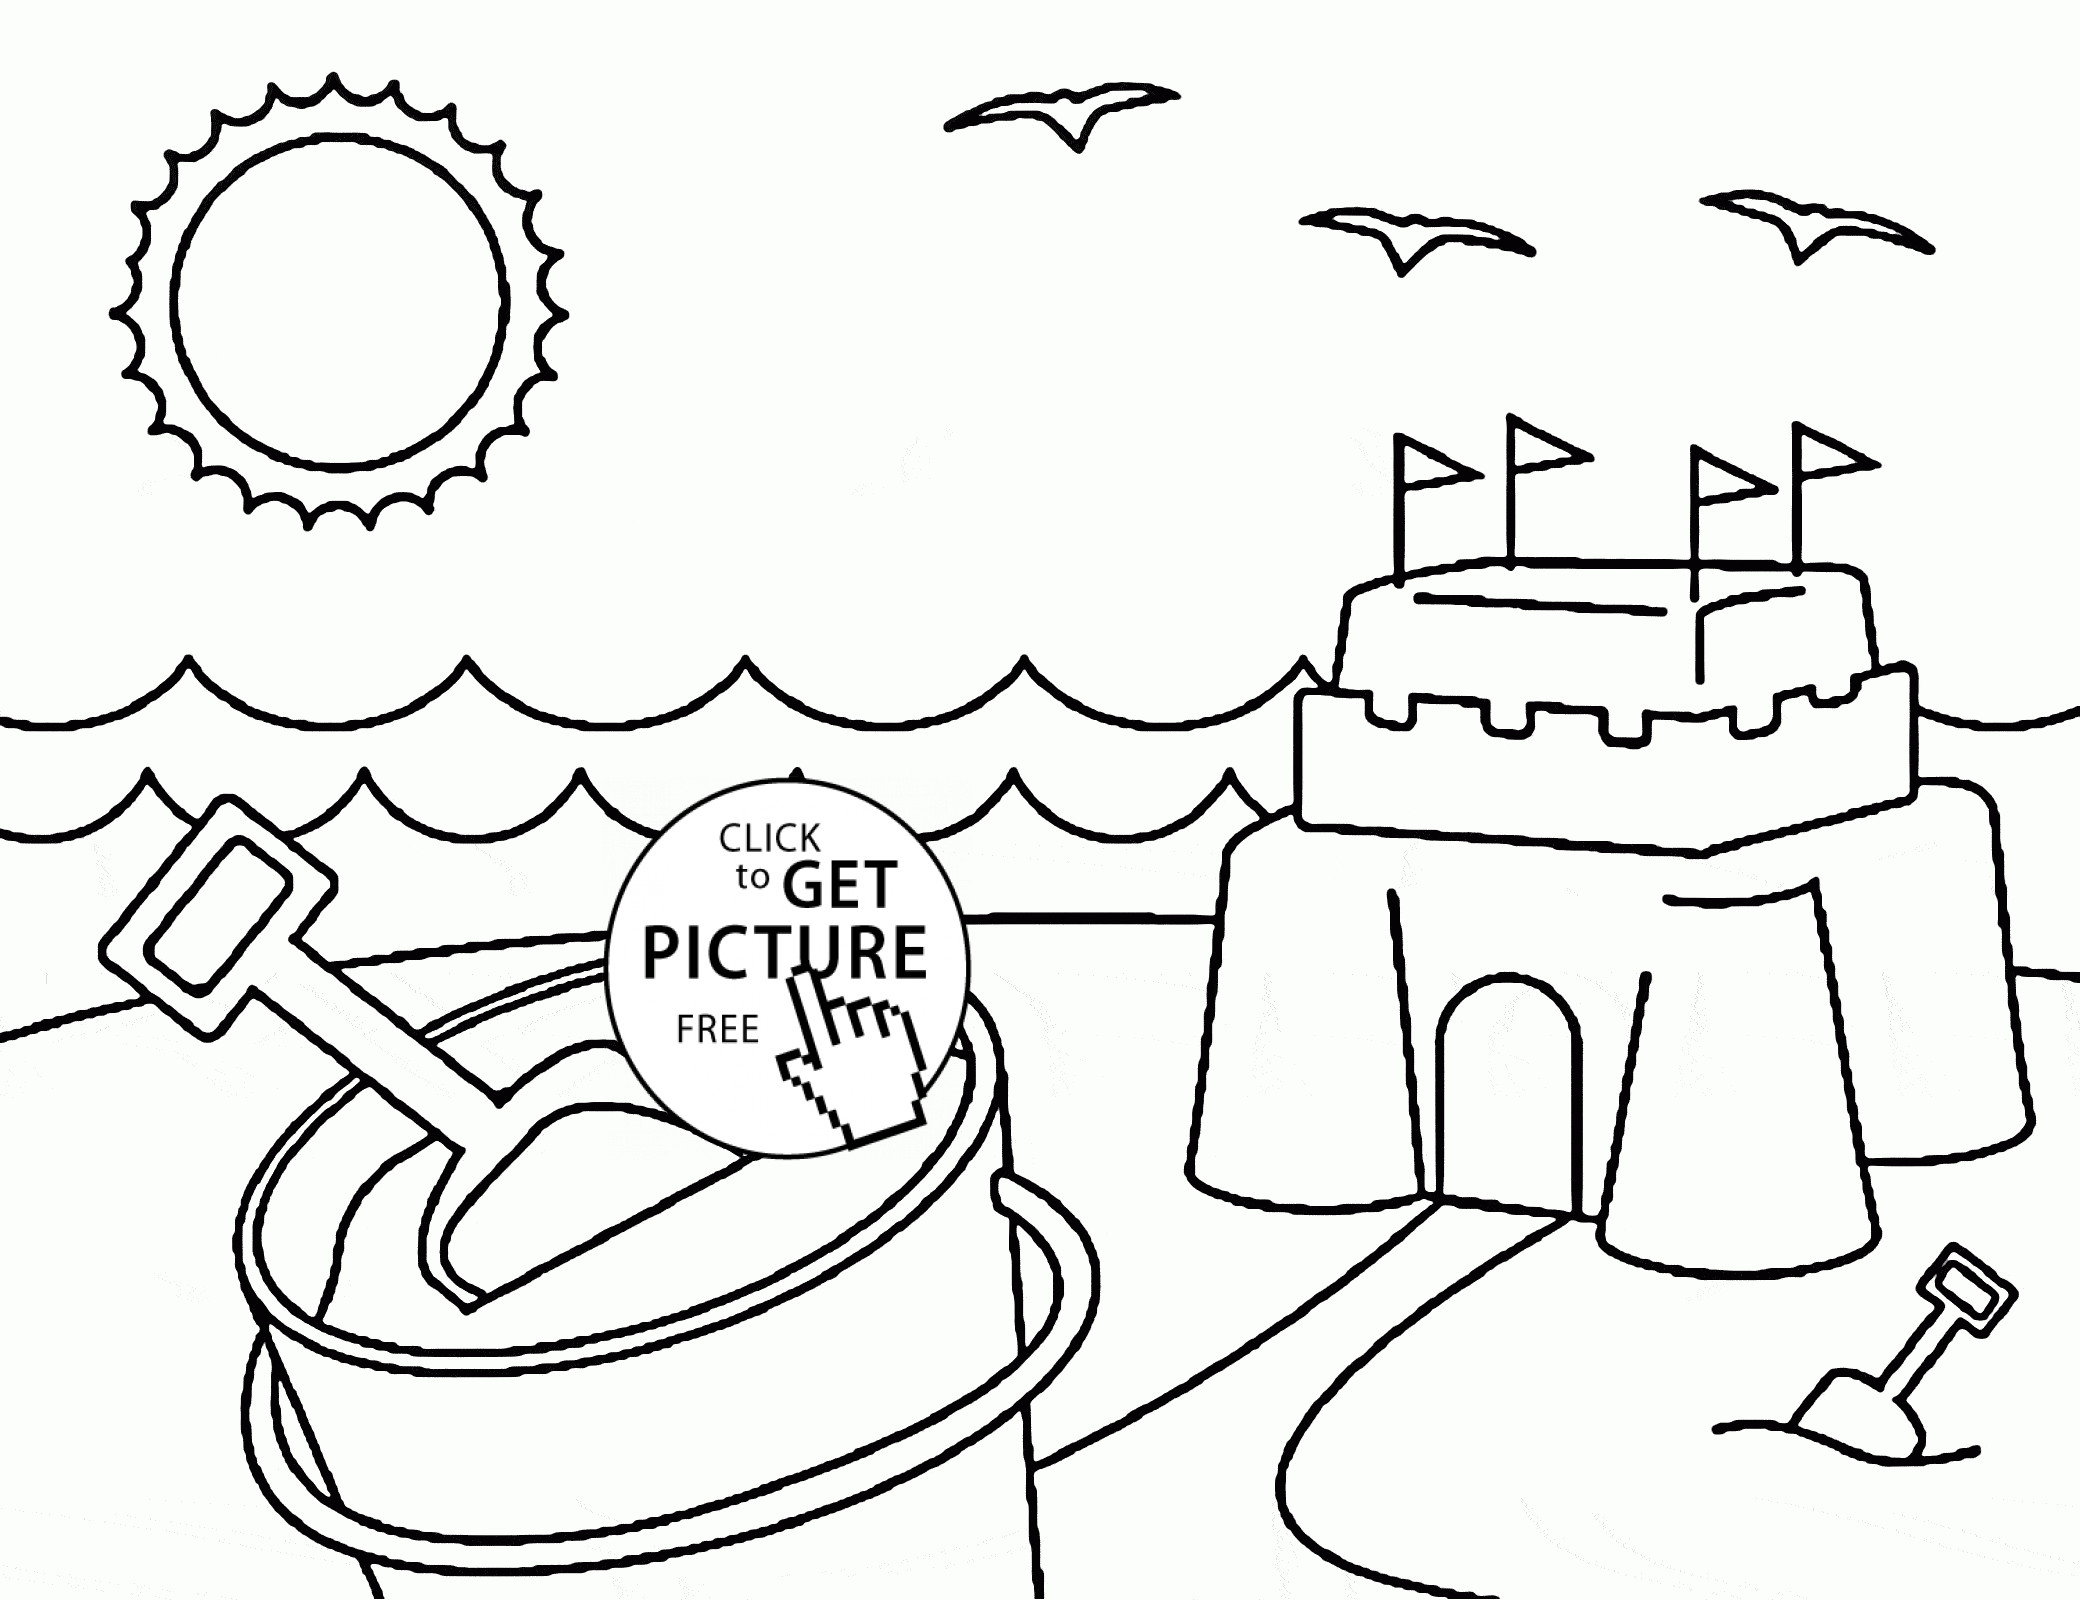 Sun Beach Preschool Coloring Sheets
 Bright Summer Sun And Beach Coloring Page For Kids Summer